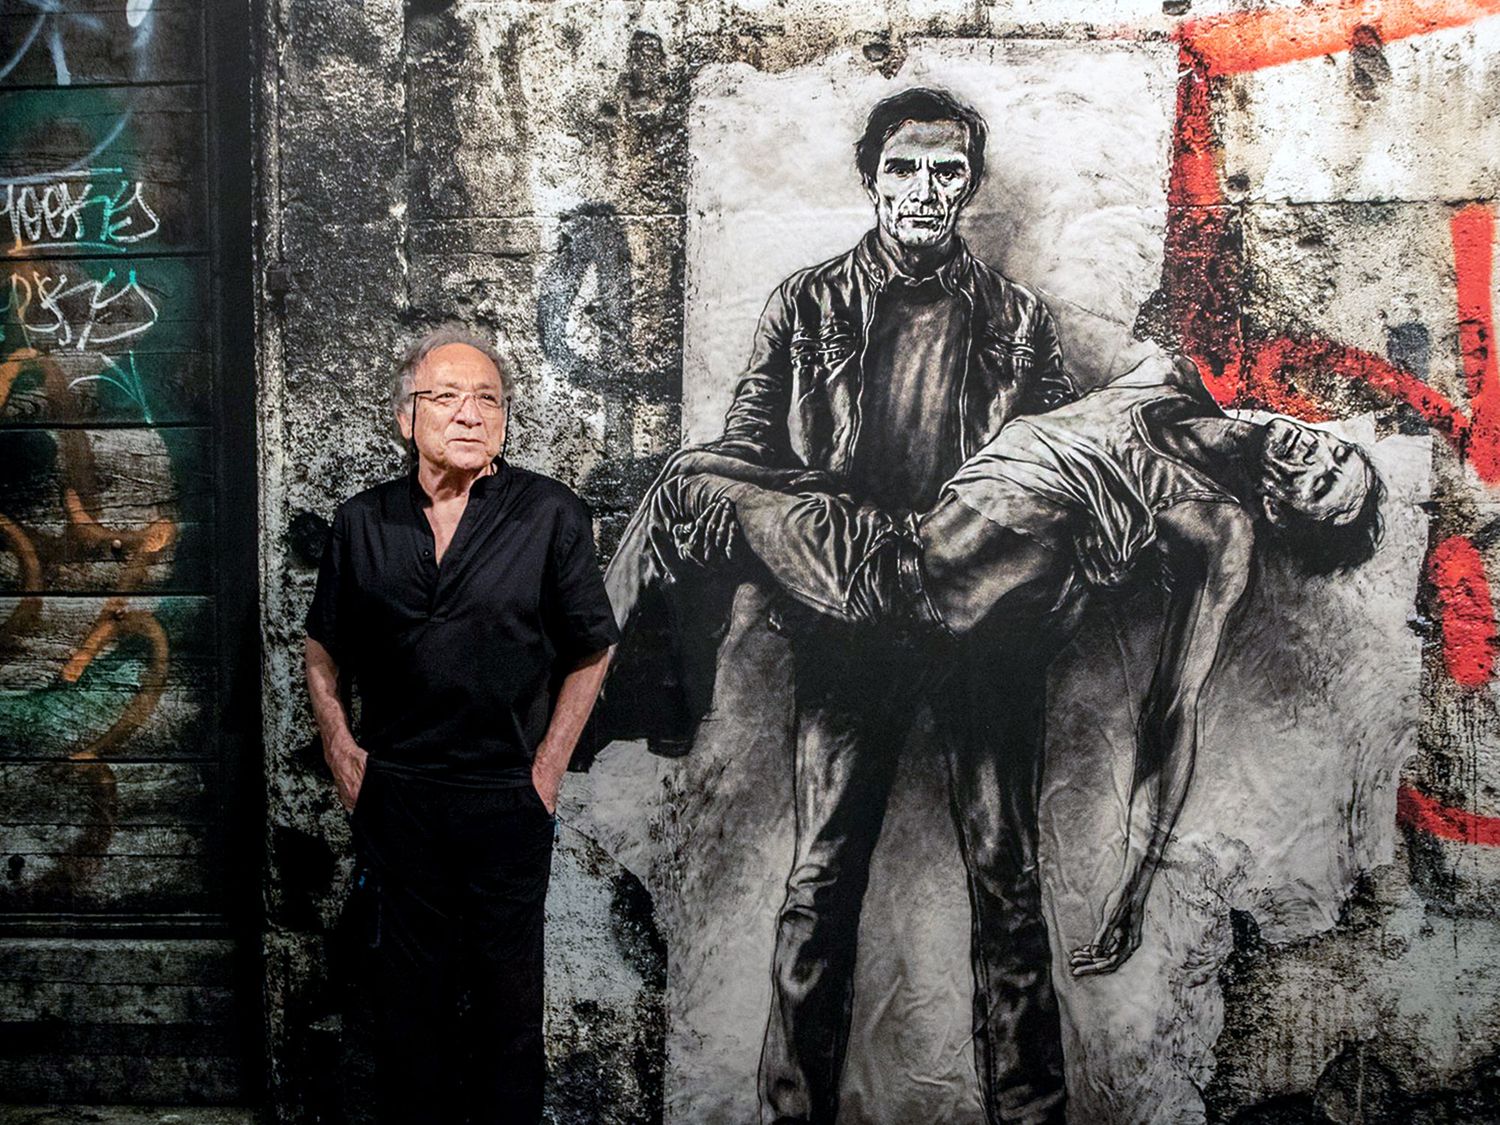 Ernest Pignon-Ernest next to its iconic portrait of Pasolini during the exhibition “Ecce Homo” in Avignon (2019-2020) which celebrated more than 50 years of artistic expression (©MAXPPP).